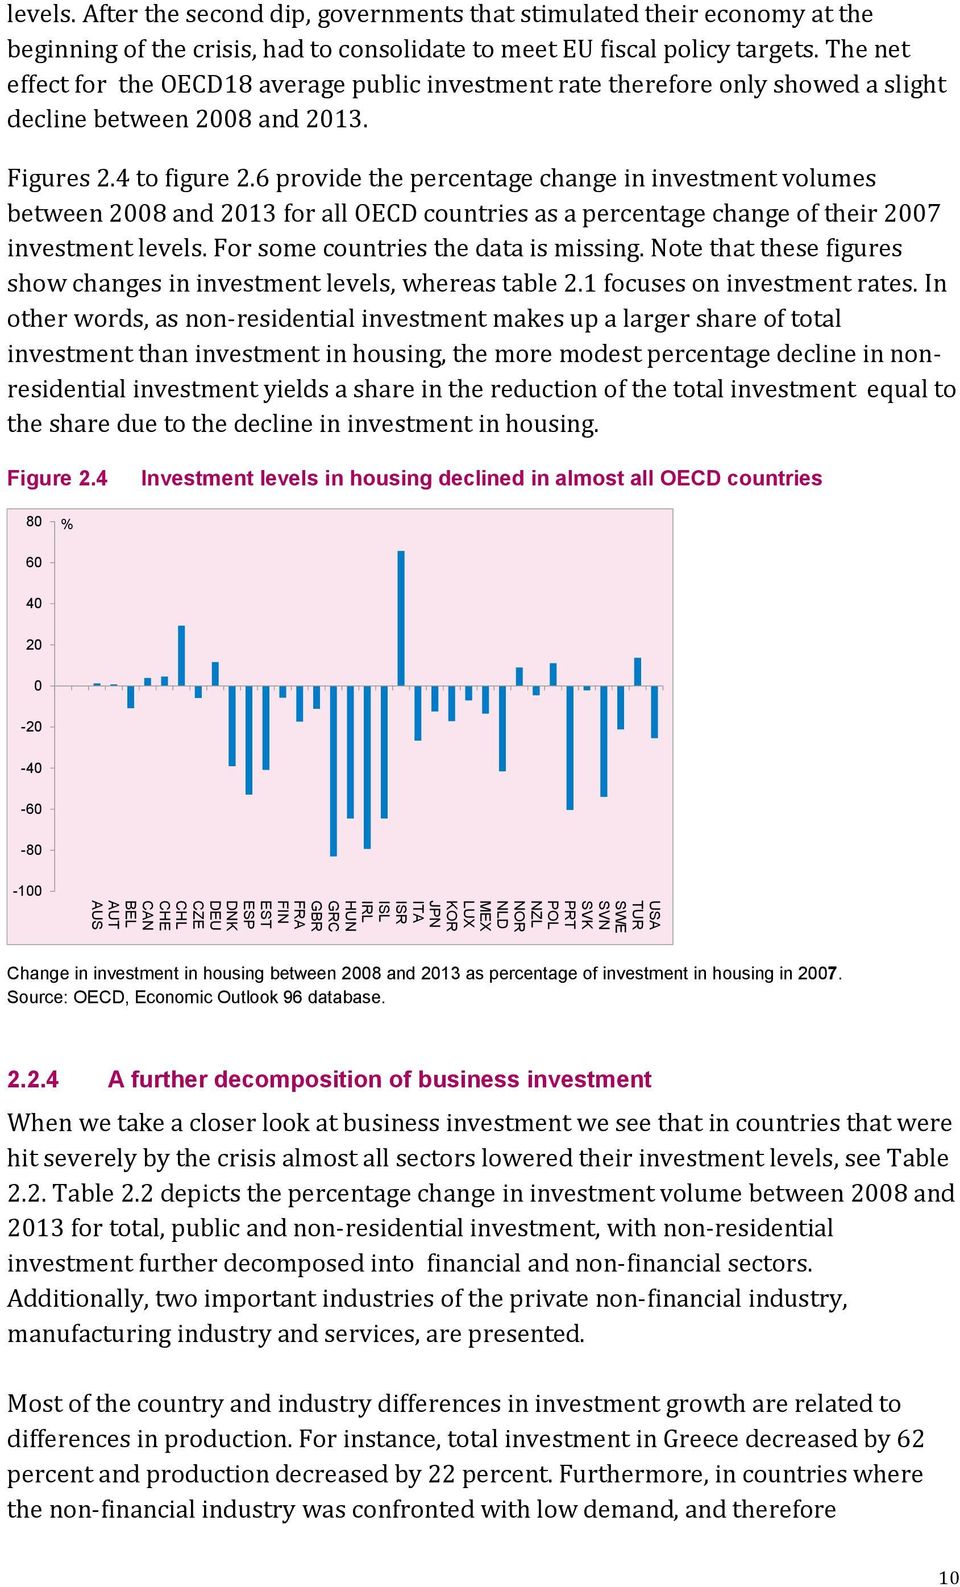 6 provide the percentage change in investment volumes between 2008 and 2013 for all OECD countries as a percentage change of their 2007 investment levels. For some countries the data is missing.